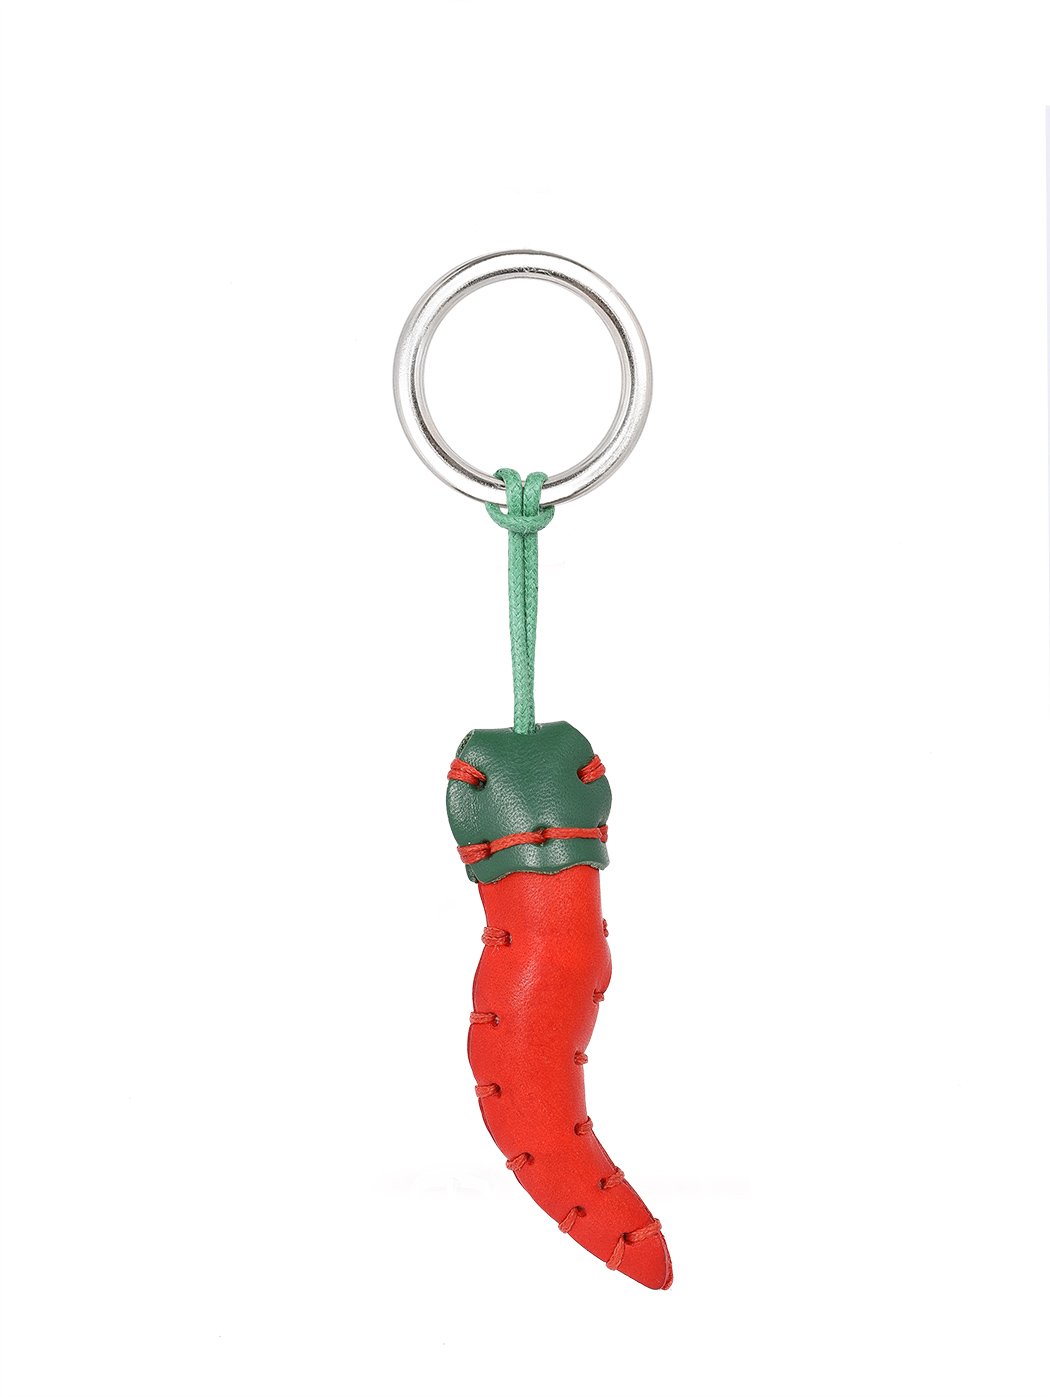 Key Chain - Red Chili Pepper Red